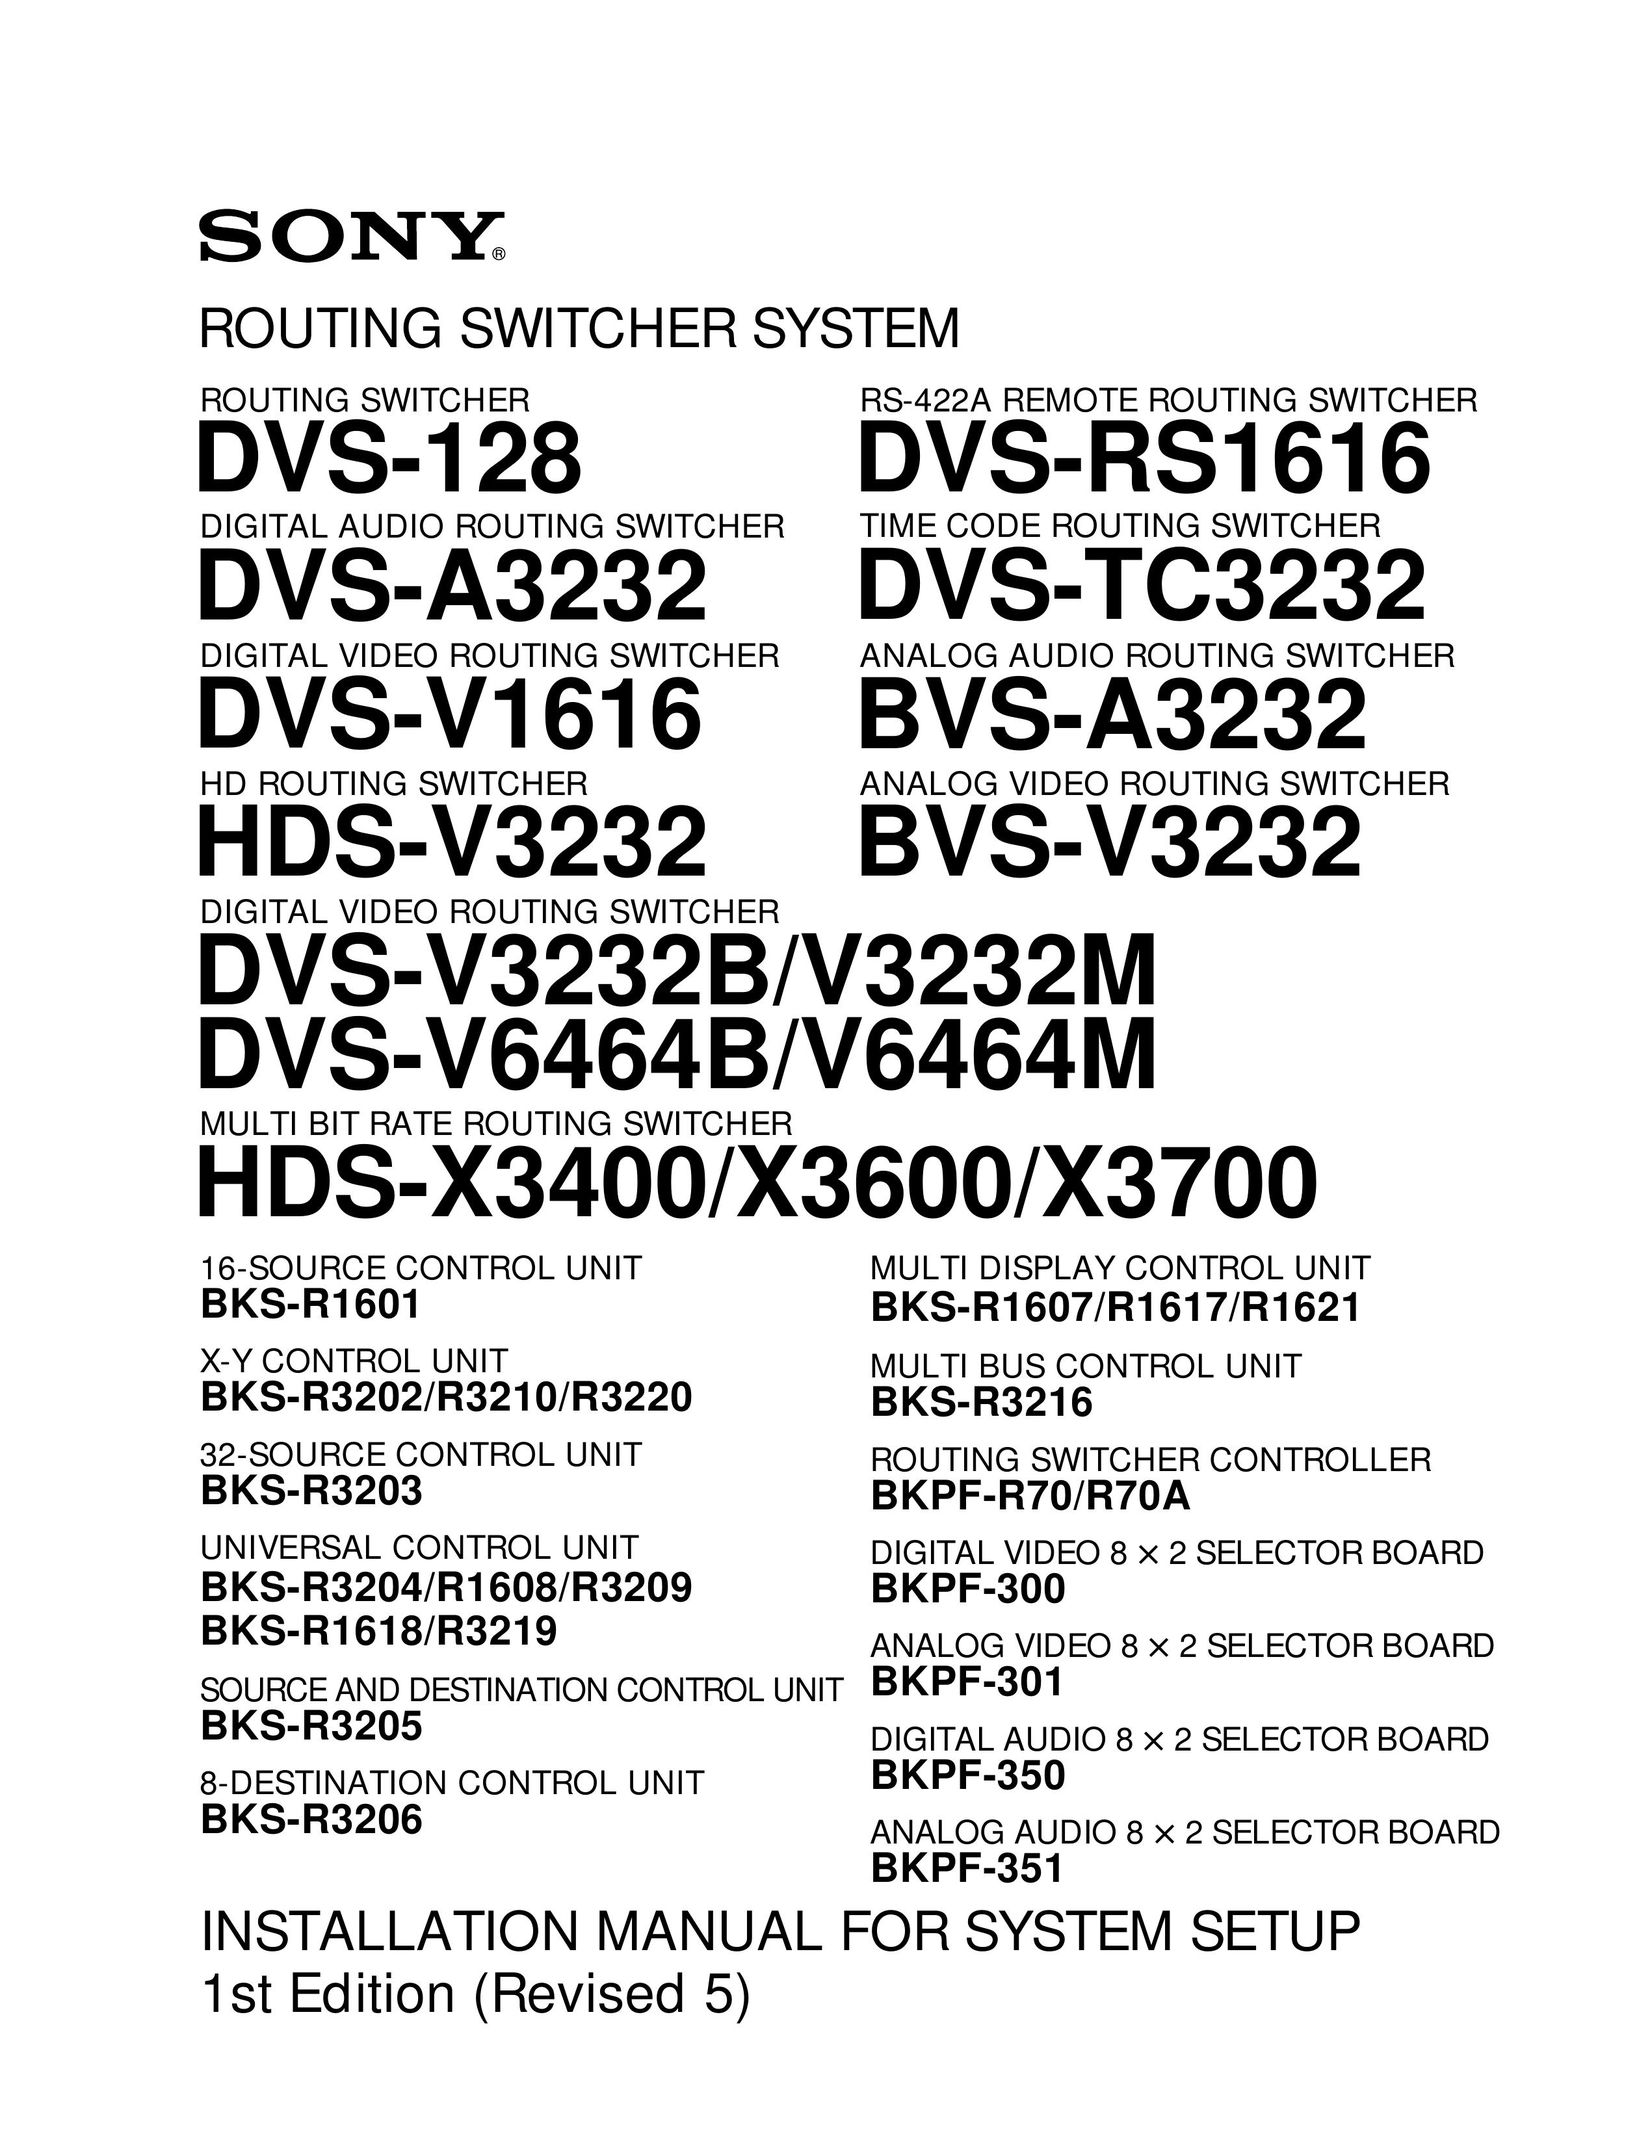 Sony DVS-TC3232 Network Router User Manual